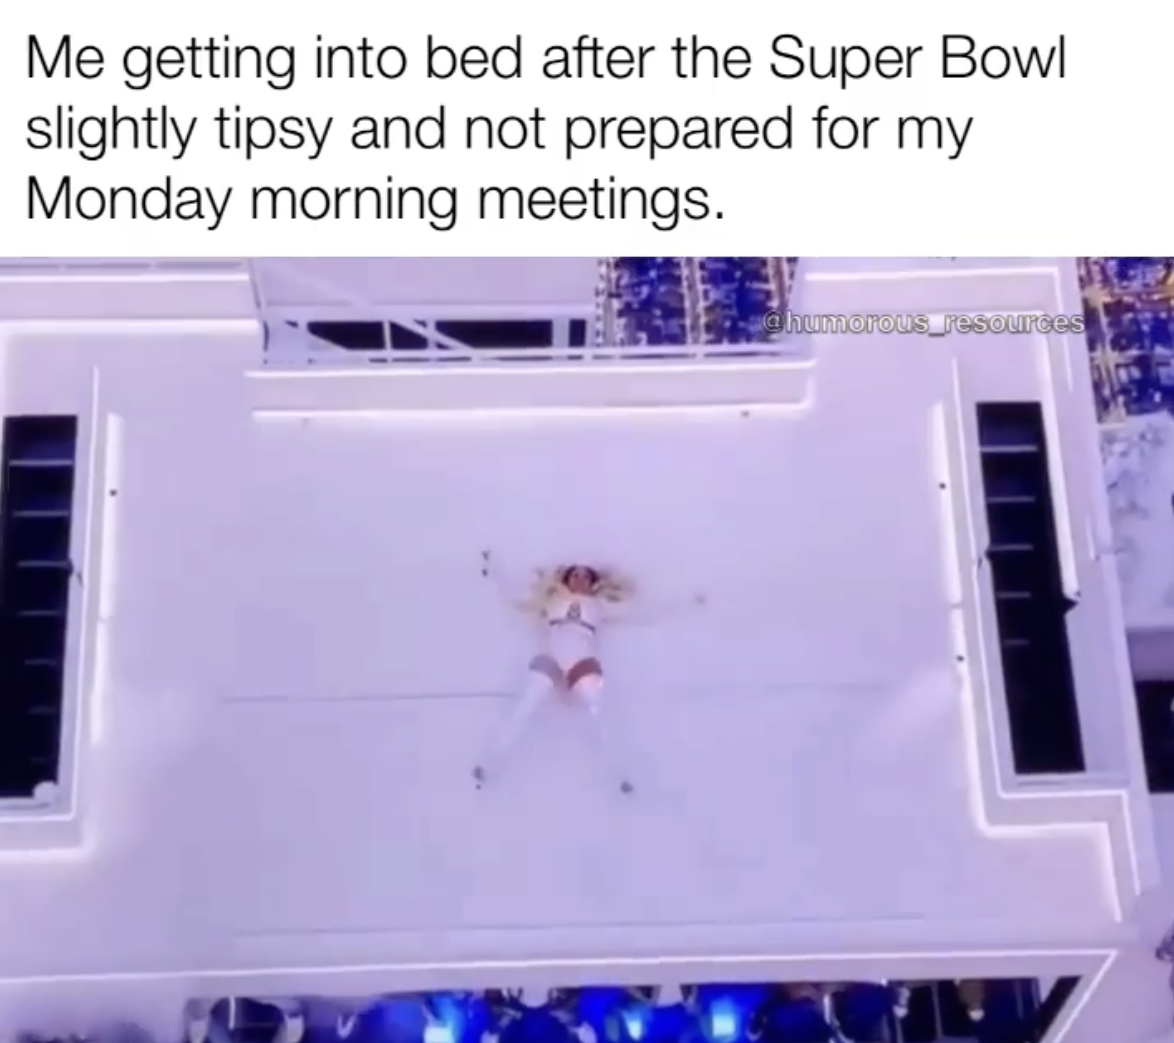 super bowl memes 2022 - shiloh industries - Me getting into bed after the Super Bowl slightly tipsy and not prepared for my Monday morning meetings. Batorius Niboutes